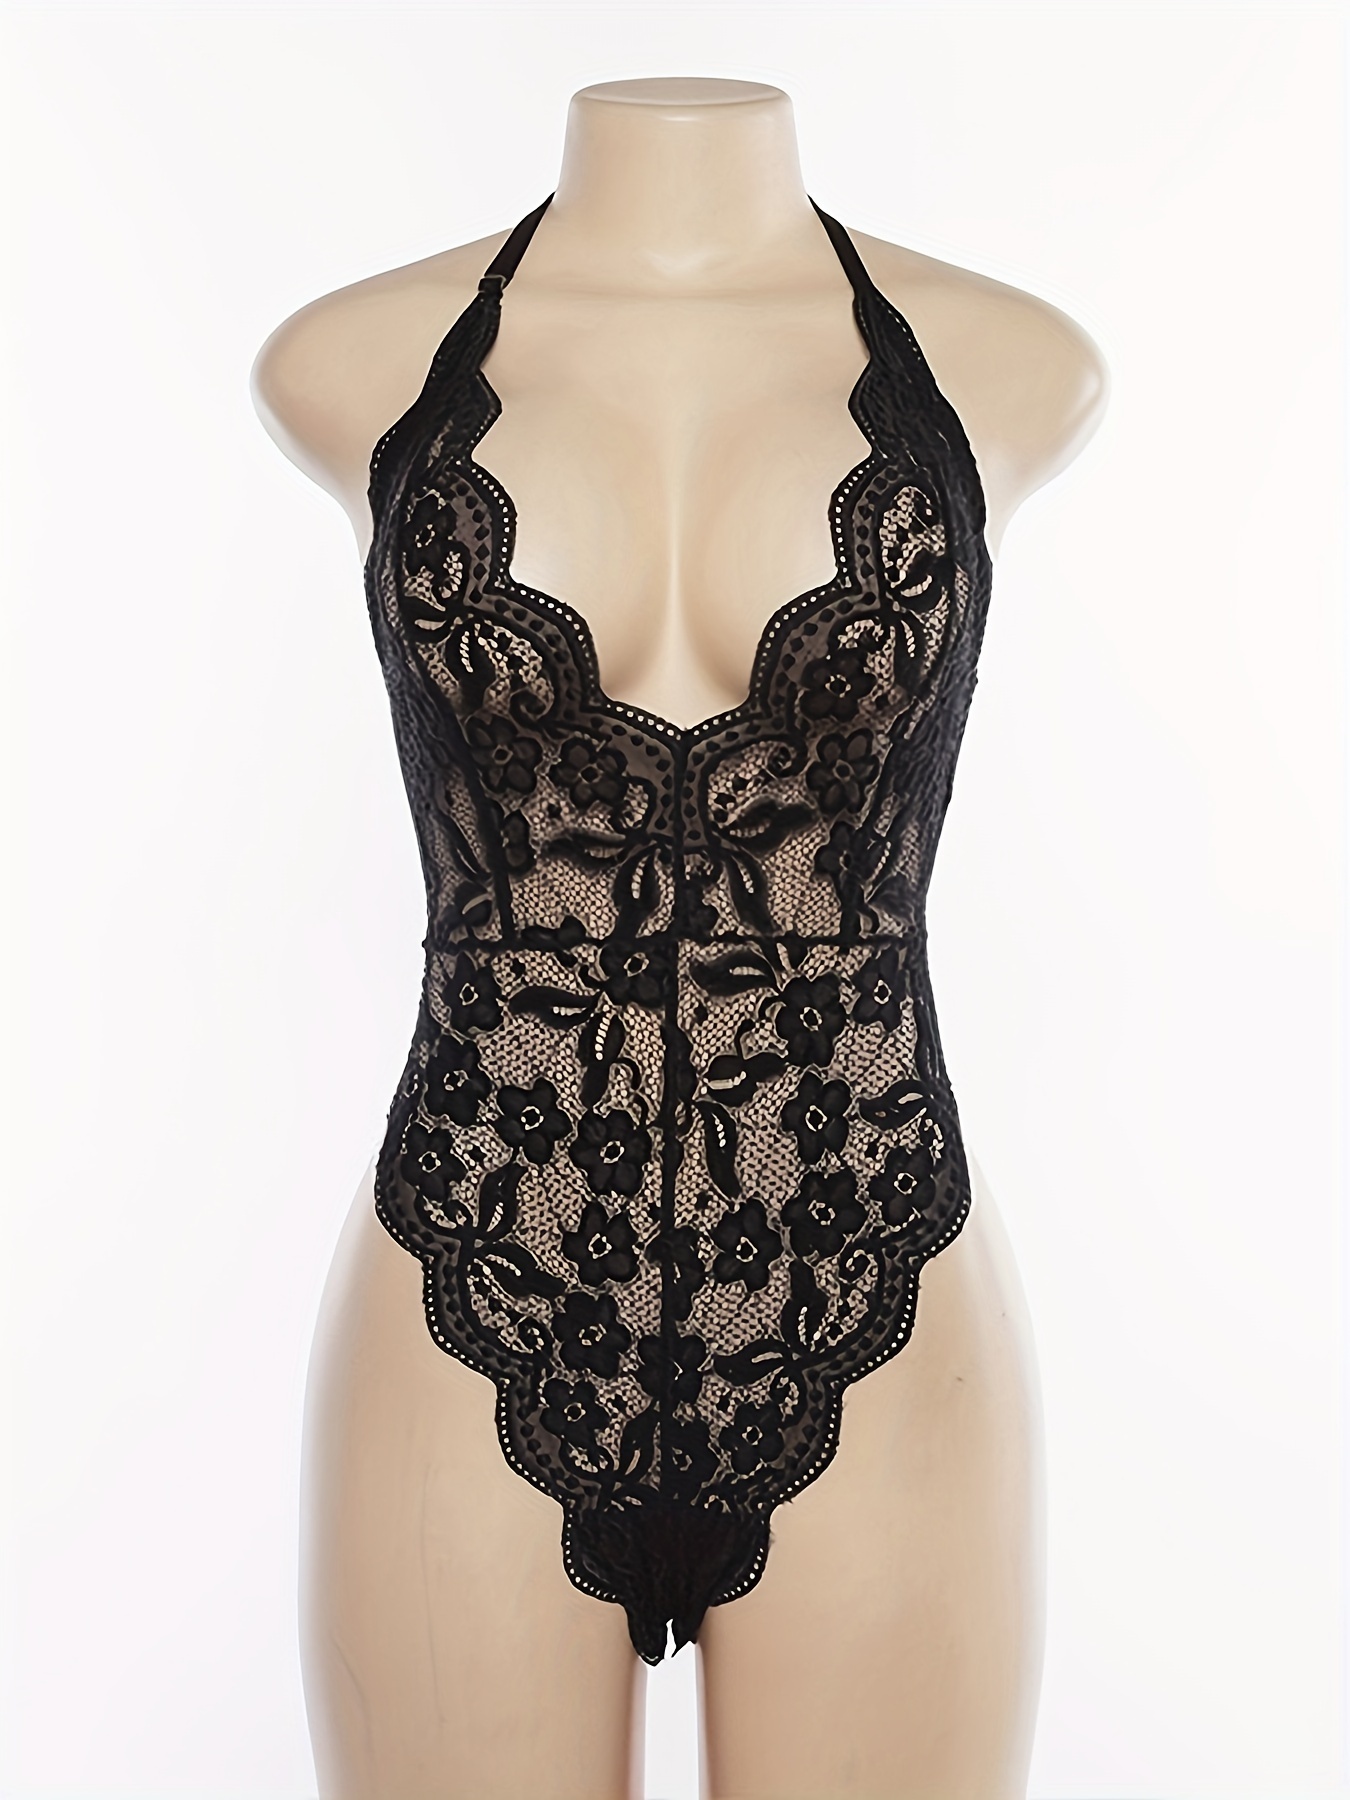 Romantic Lace Bodysuit With Hollow V Neck And Sheer Teddy Design